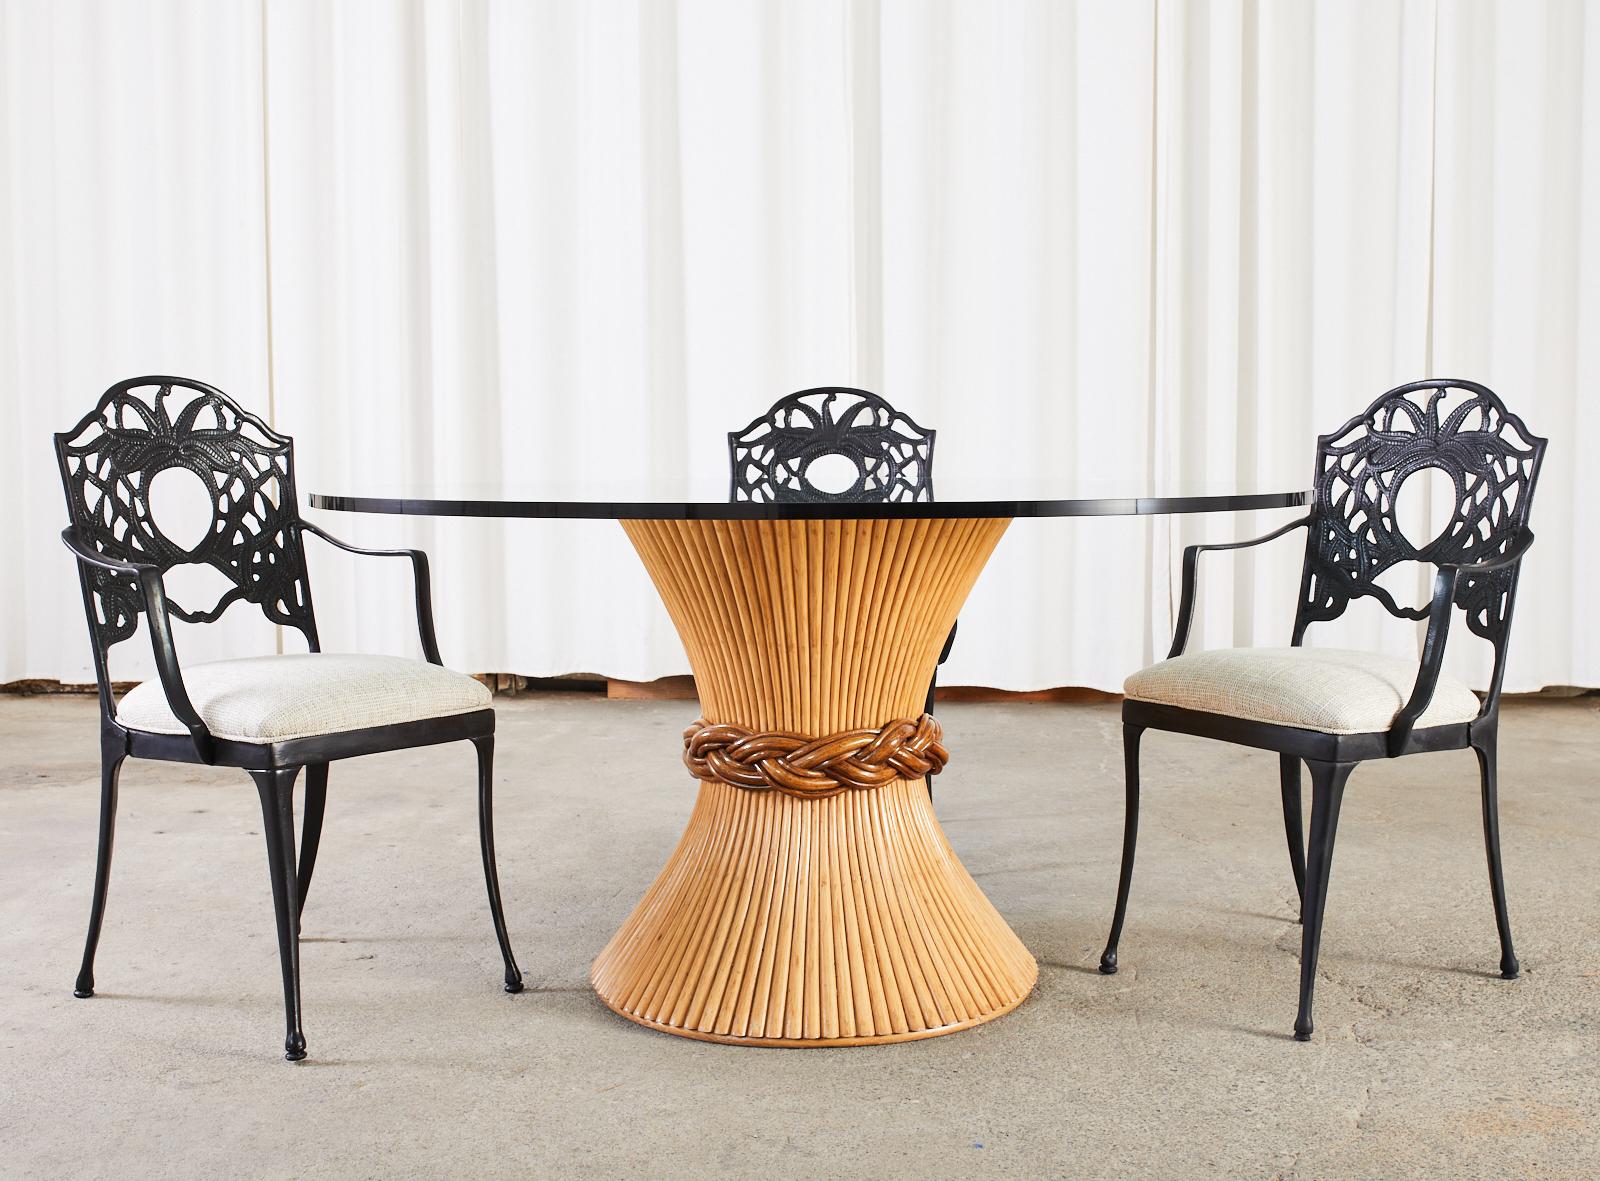 Genuine labeled McGuire rattan round glass top dining table made in the California organic modern style. The base features an hourglass form of bundled rattan with a braided waist in a rich contrasting shade. The table is topped with a genuine